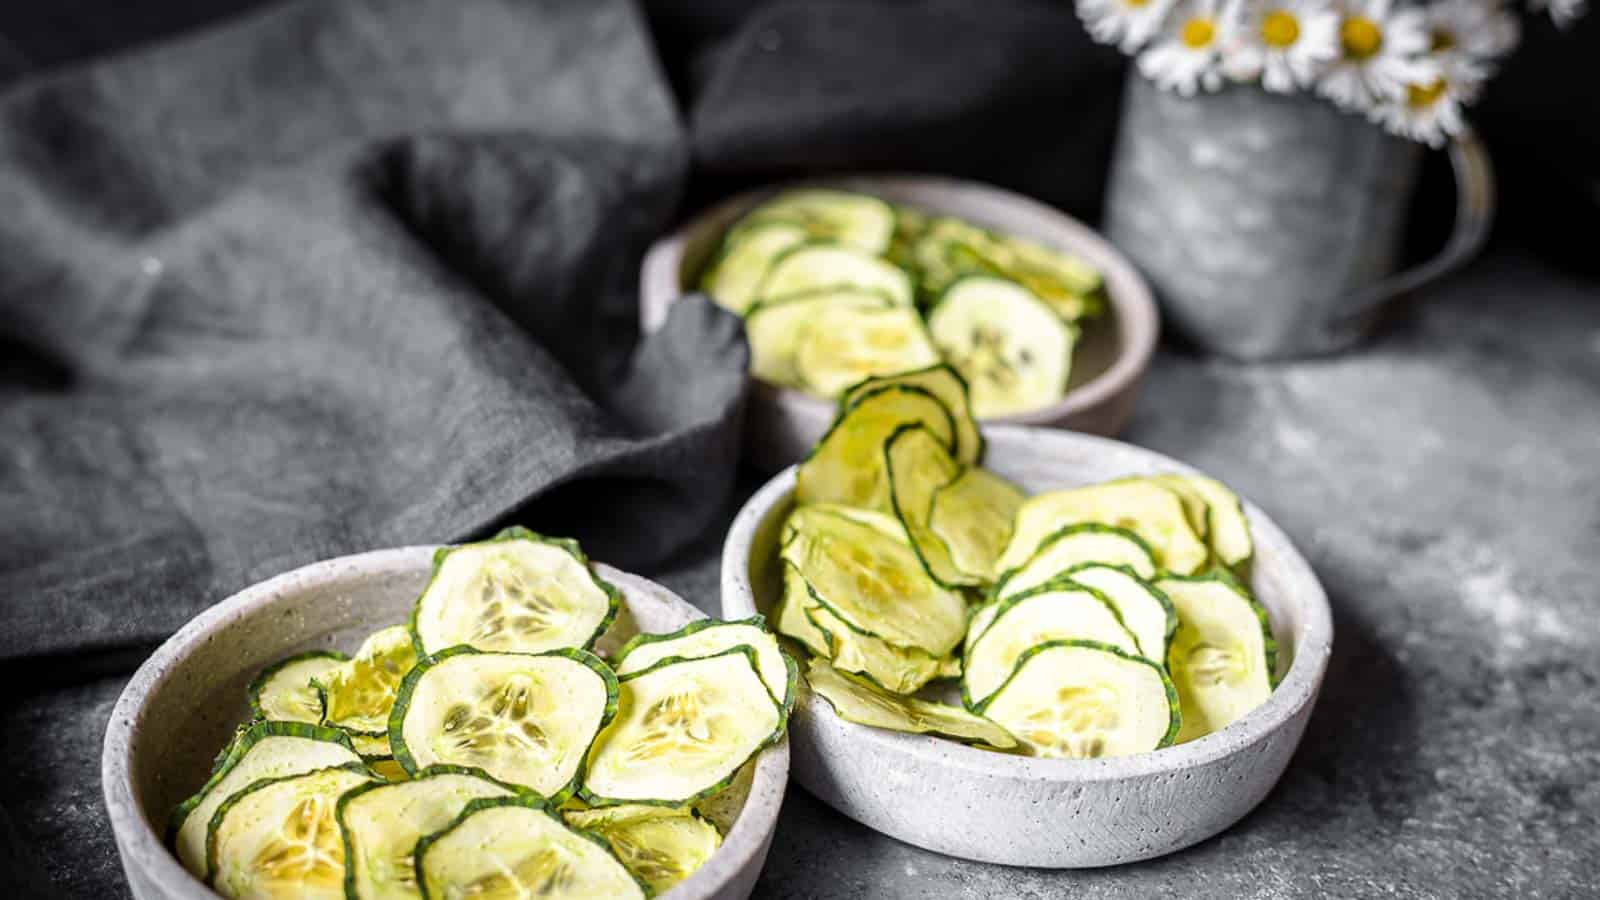 <p>Crispy cucumber chips, lightly seasoned and baked to perfection, offer a refreshing twist for your after-school snacking routine. Their satisfying crunch and light flavor make them a guilt-free yet satisfying option.<br><strong>Get the Recipe: </strong><a href="https://www.lowcarb-nocarb.com/cucumber-chips-recipe/?utm_source=msn&utm_medium=page&utm_campaign=msn">Cucumber Chips</a></p> <div class="remoji_bar">          <div class="remoji_error_bar">   Error happened.   </div>  </div> <p>The post <a rel="nofollow" href="https://fooddrinklife.com/after-school-savory-snack-bites/">Satisfy after-school cravings with these 21 savory snack bites</a> appeared first on <a rel="nofollow" href="https://fooddrinklife.com">Food Drink Life</a>.</p>